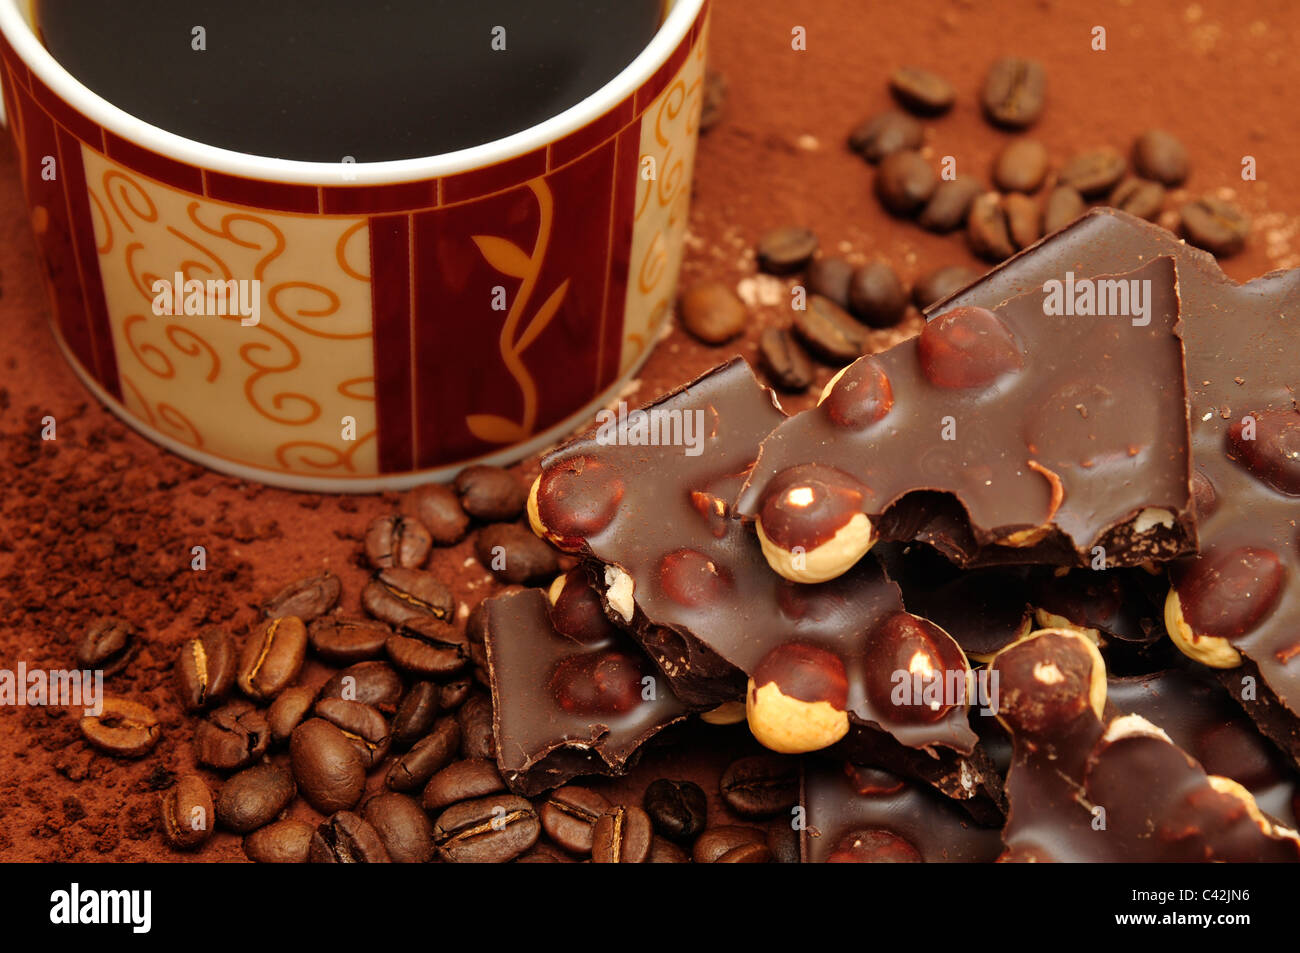 Chocolate with nuts on the brown background. Coffee drink Stock Photo